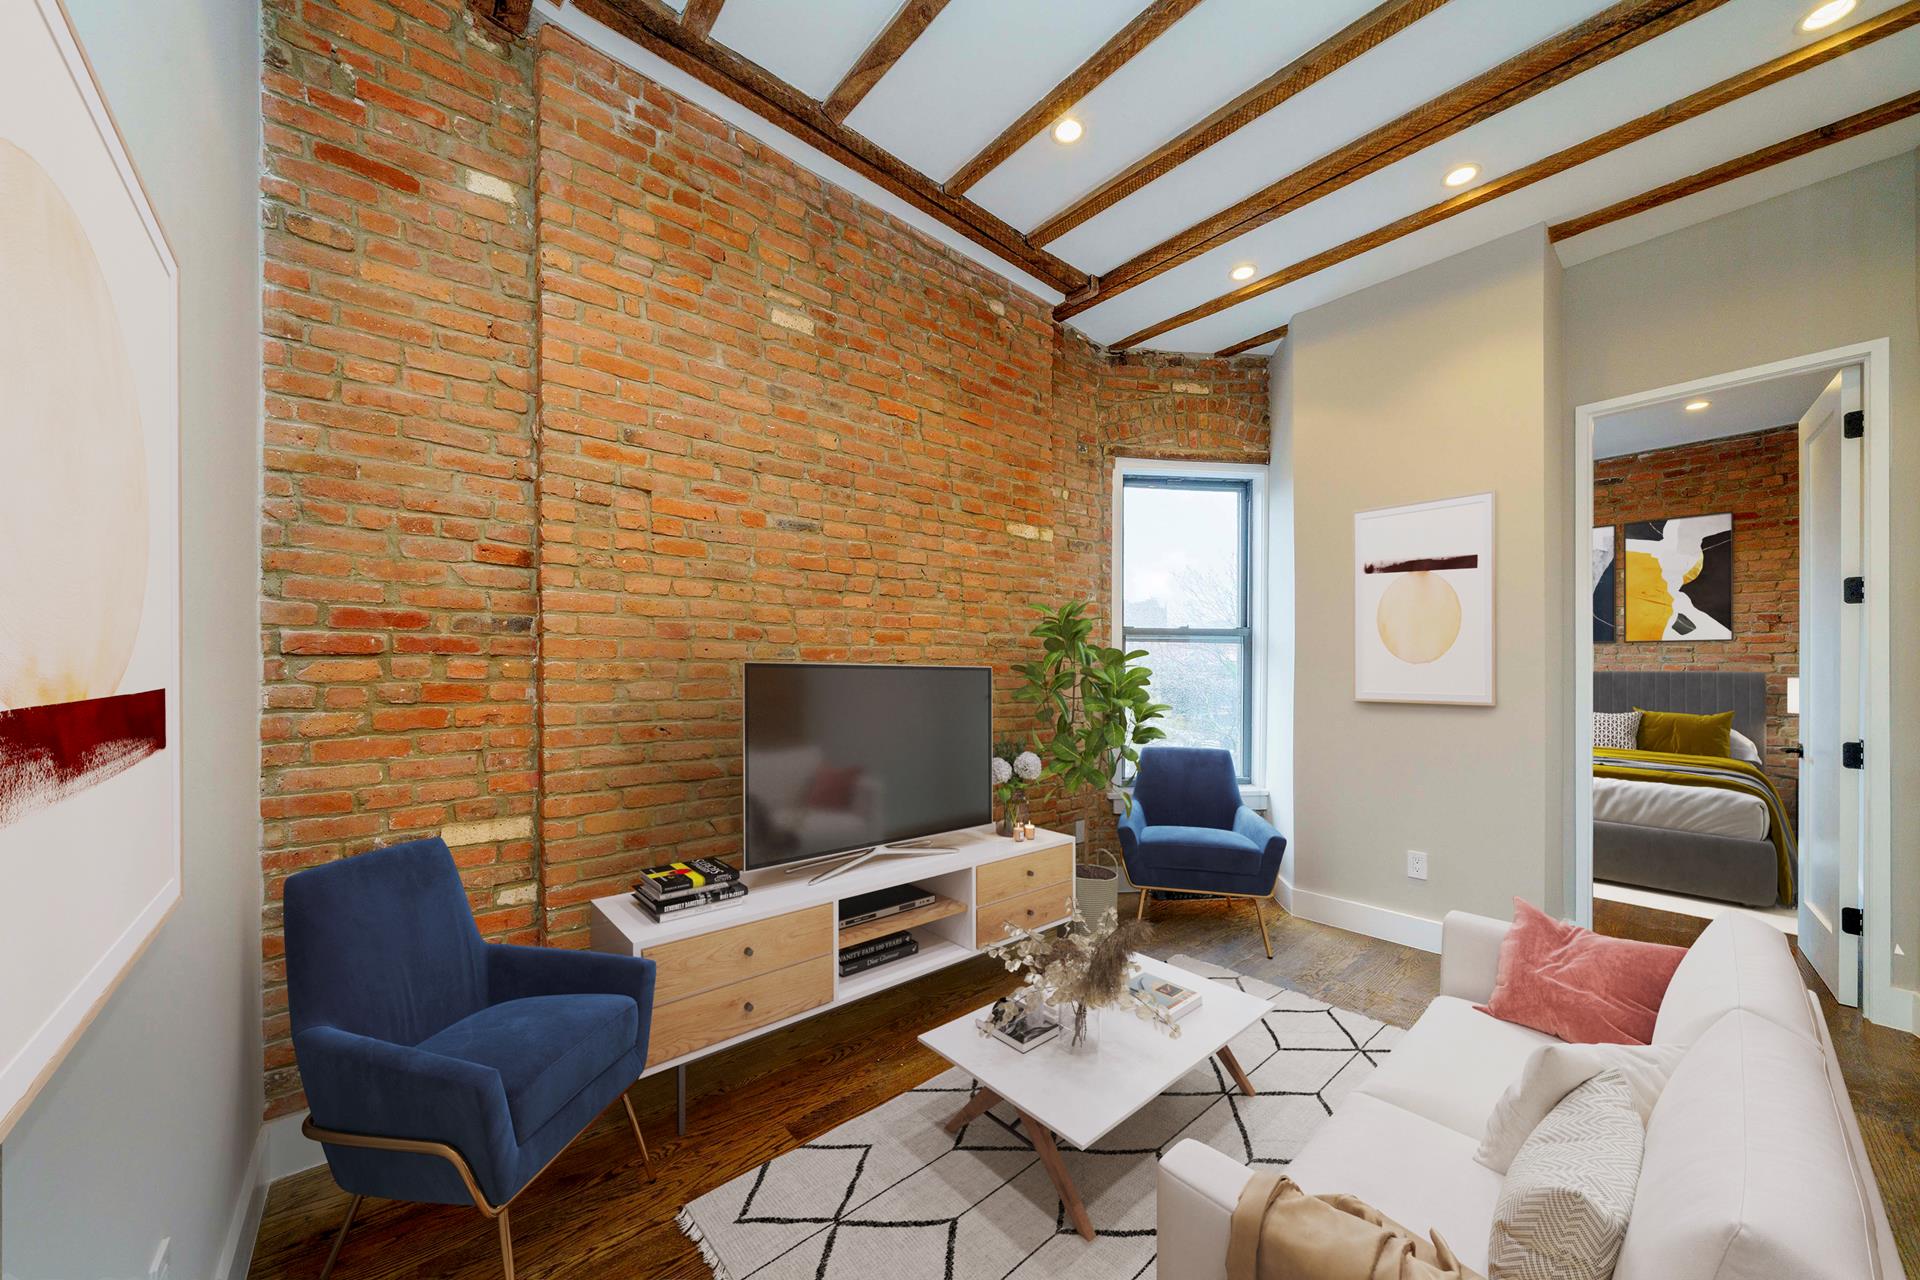 119 Christopher Street 51, West Village, Downtown, NYC - 2 Bedrooms  
2 Bathrooms  
4 Rooms - 